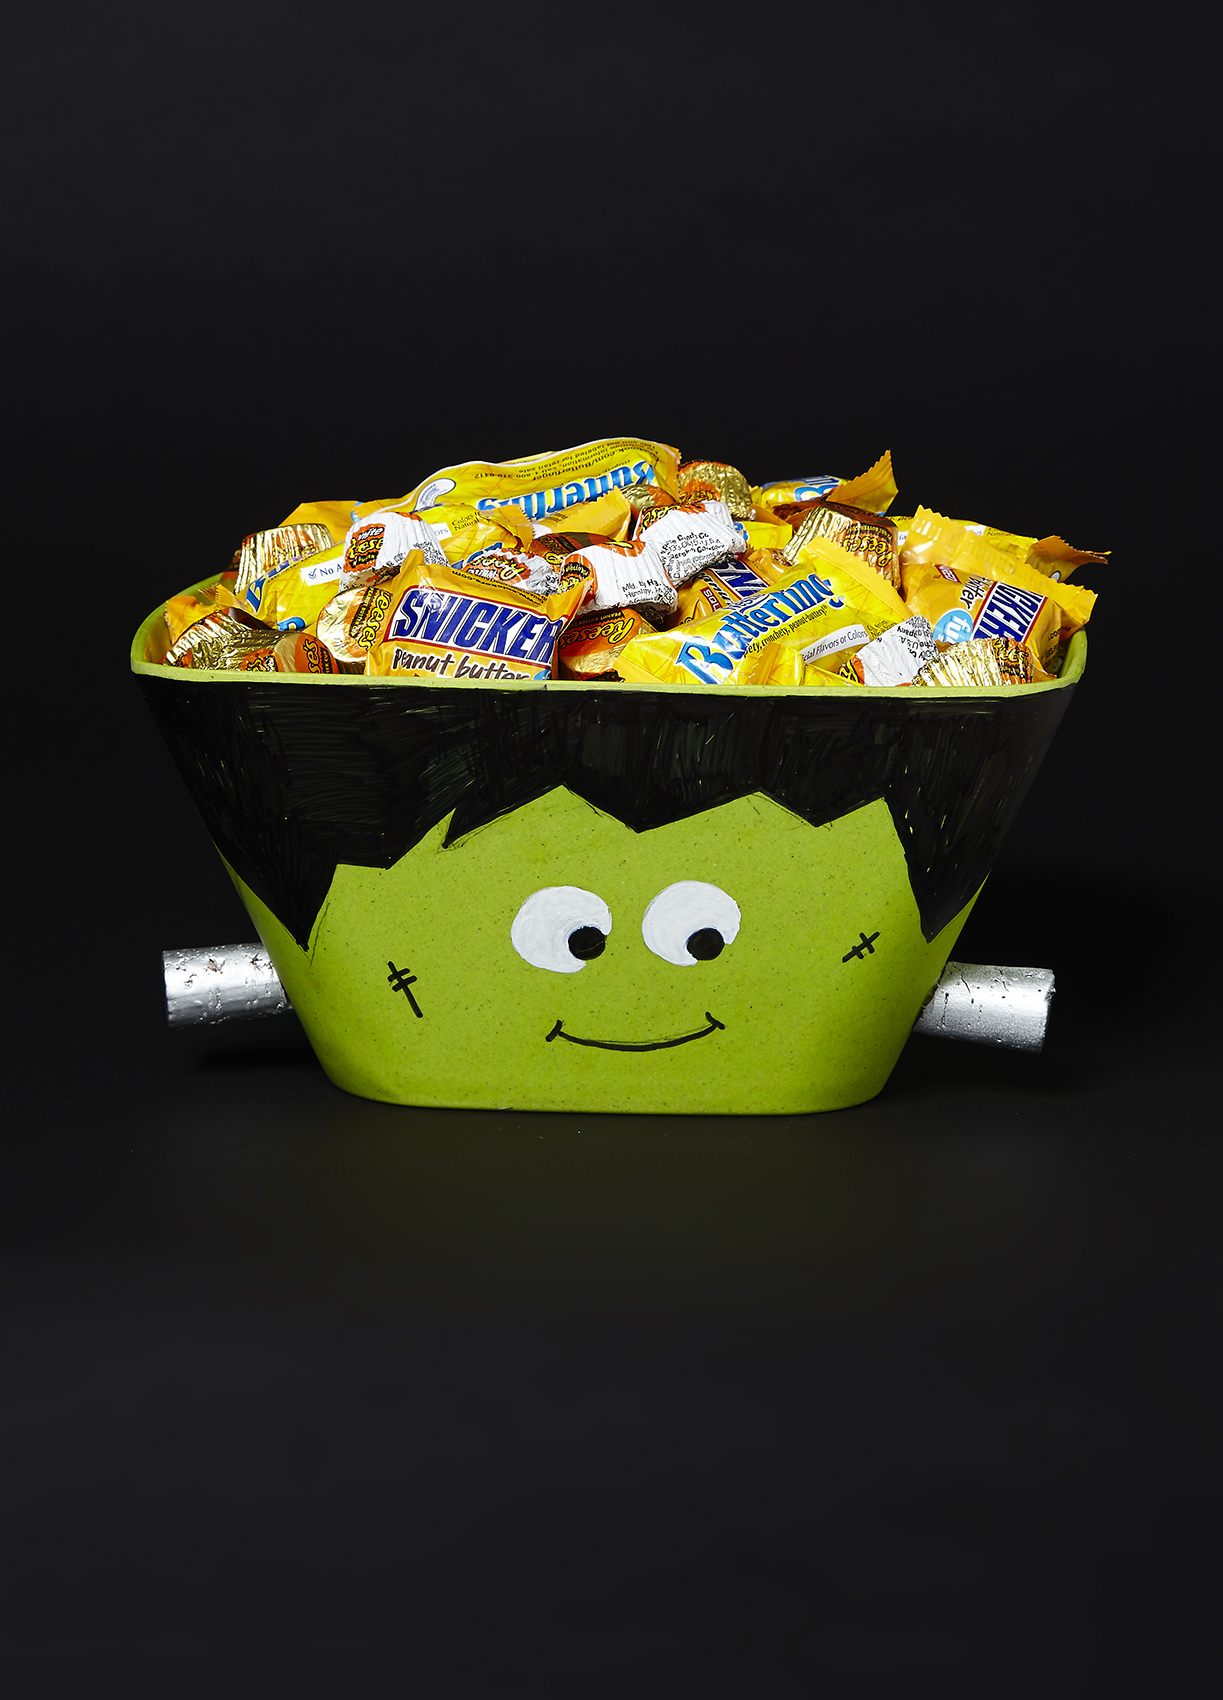 Frankenstein bowl DIY Halloween Candy Bowls You Can Serve For Halloween Treats